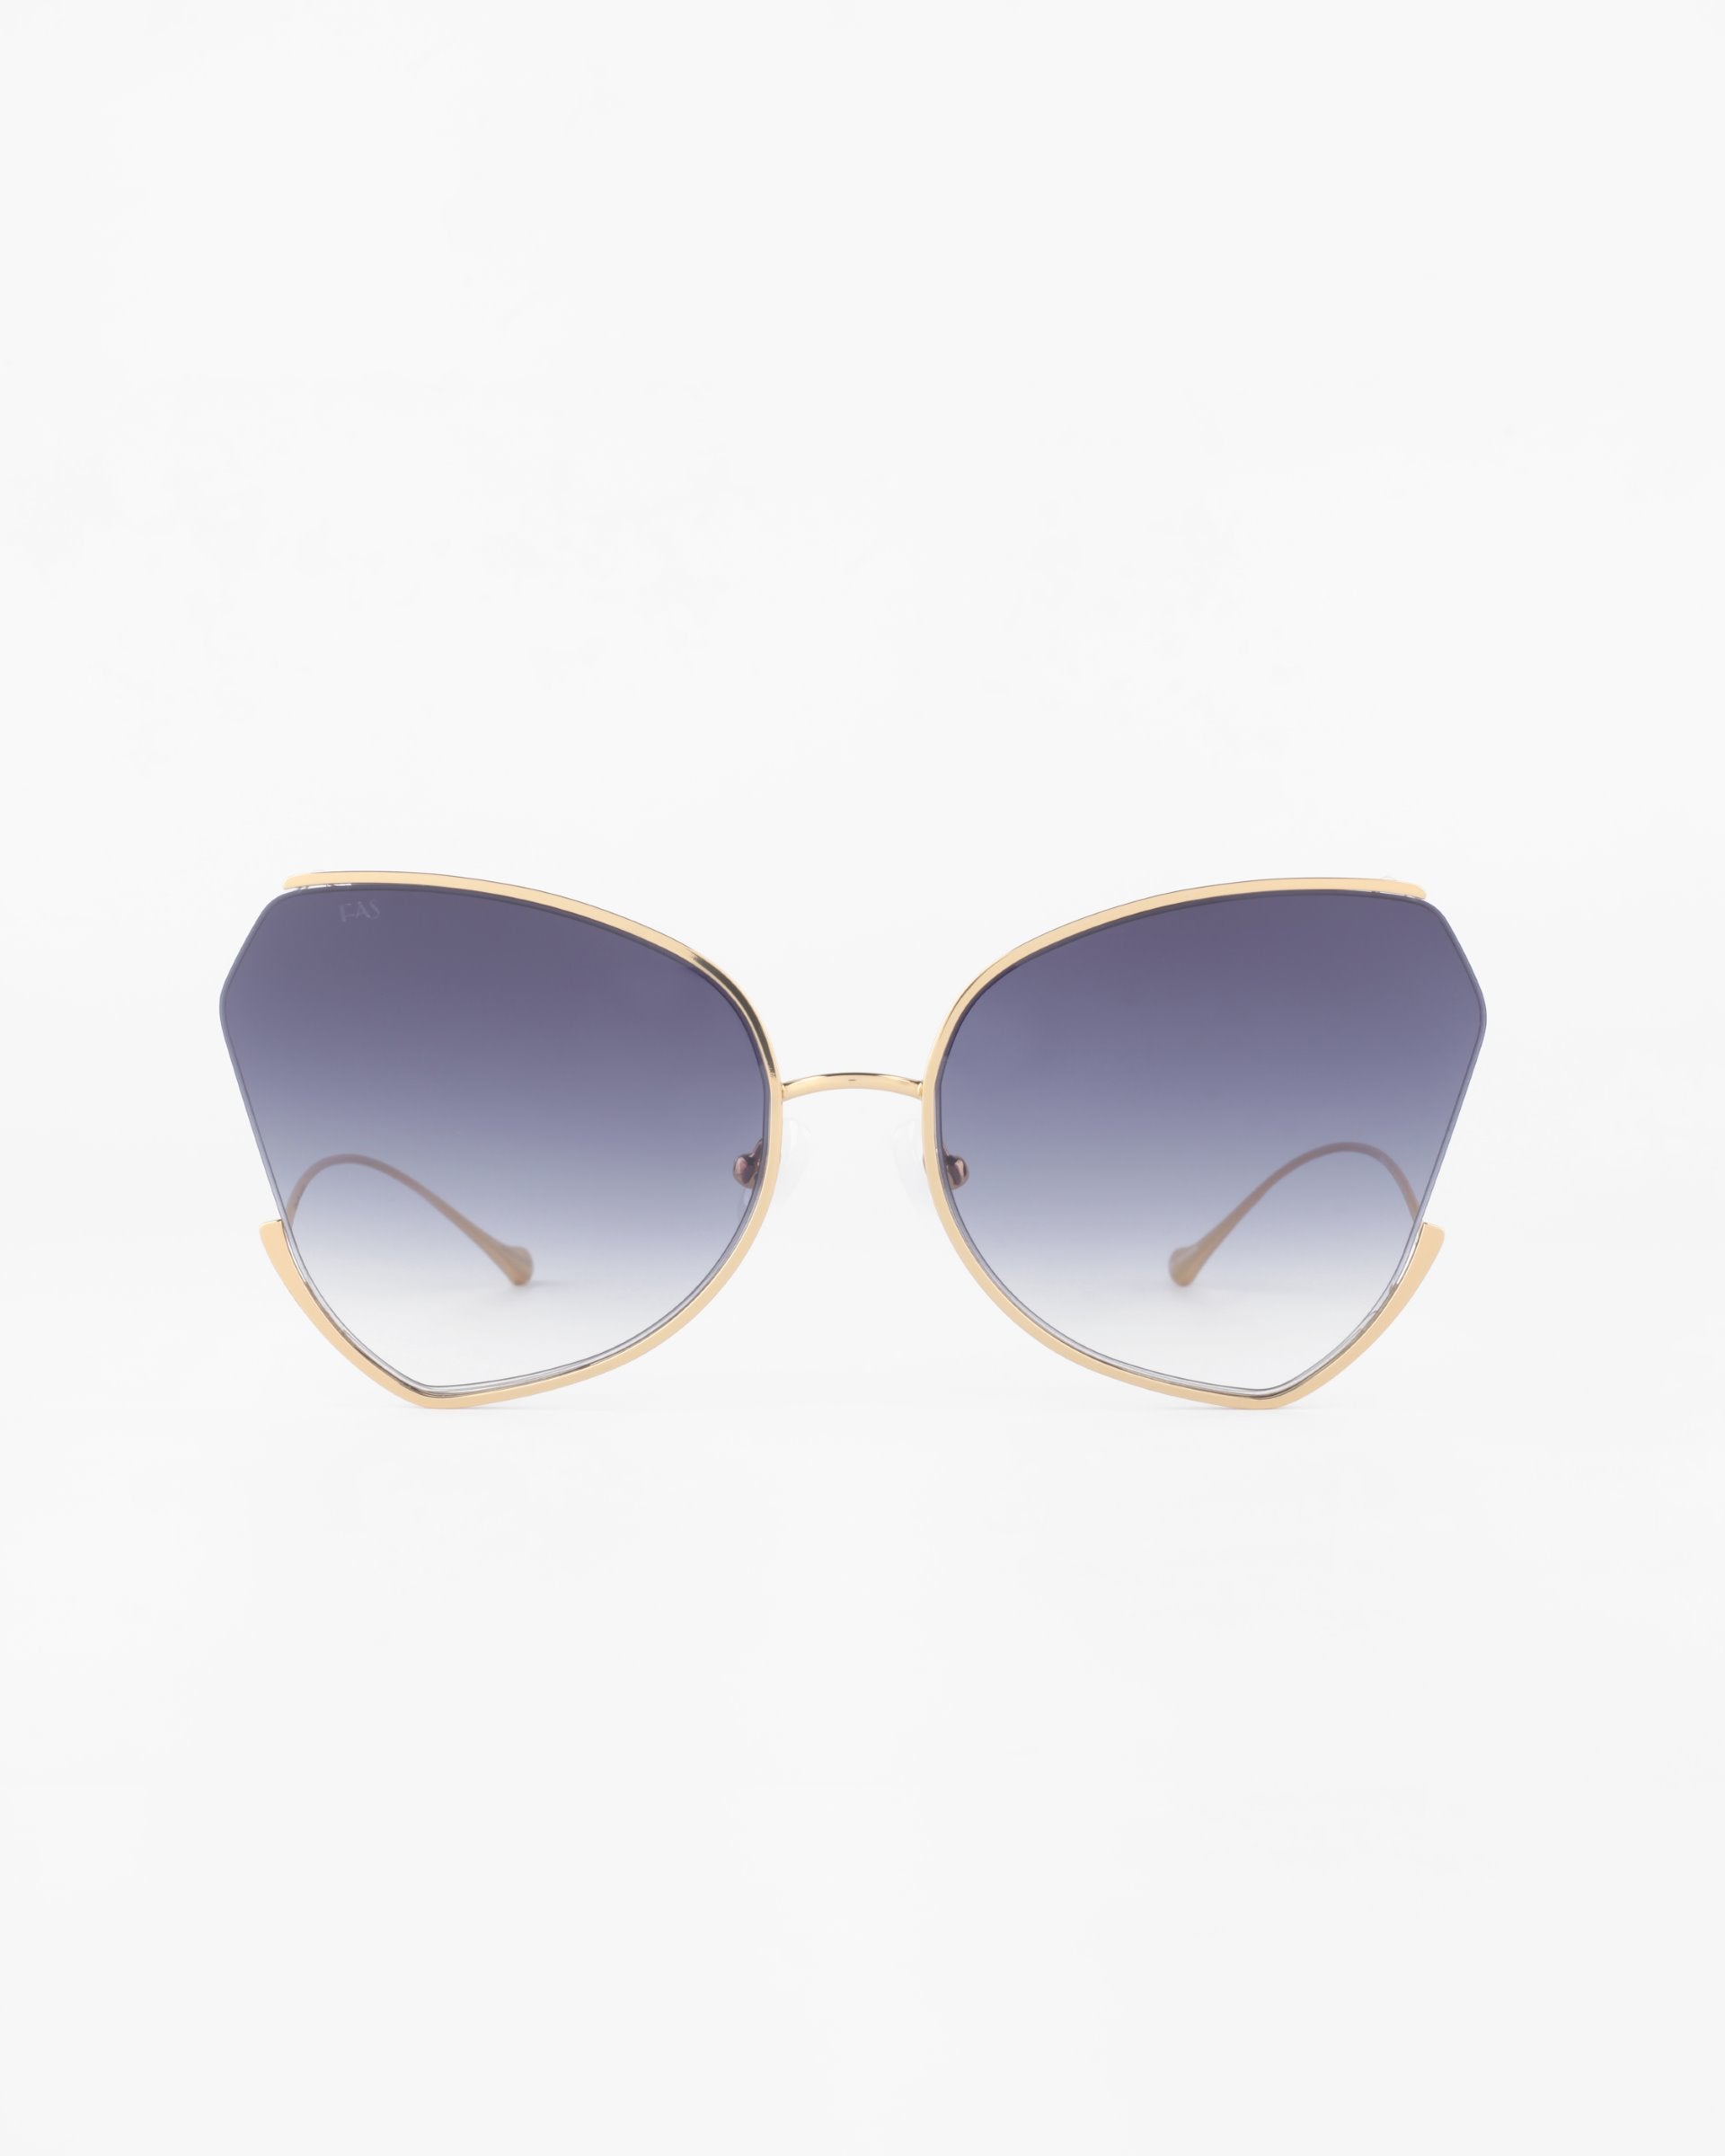 A pair of stylish For Art's Sake® Watercolour sunglasses with large, ombré lenses that fade from dark at the top to light at the bottom. The frame is thin and gold-plated stainless steel, featuring a unique butterfly silhouette that gives it a fashionable, modern look.